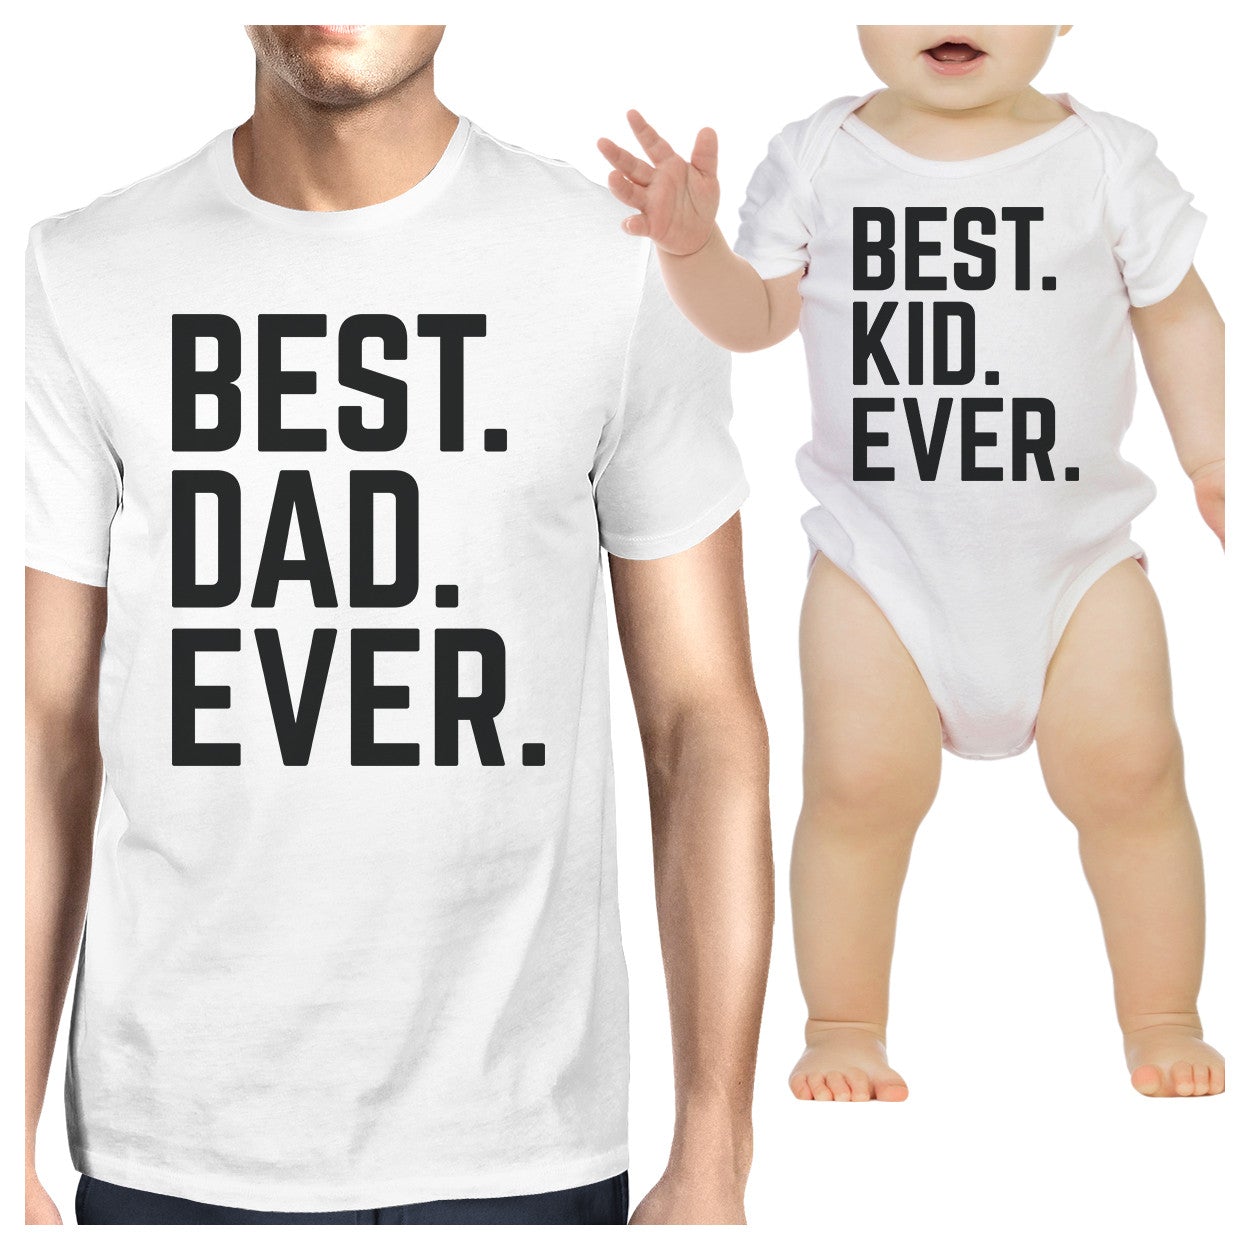 Best Dad And Kid Ever White Dad Baby Funny Matching Tops Cute Gifts - 365 In Love